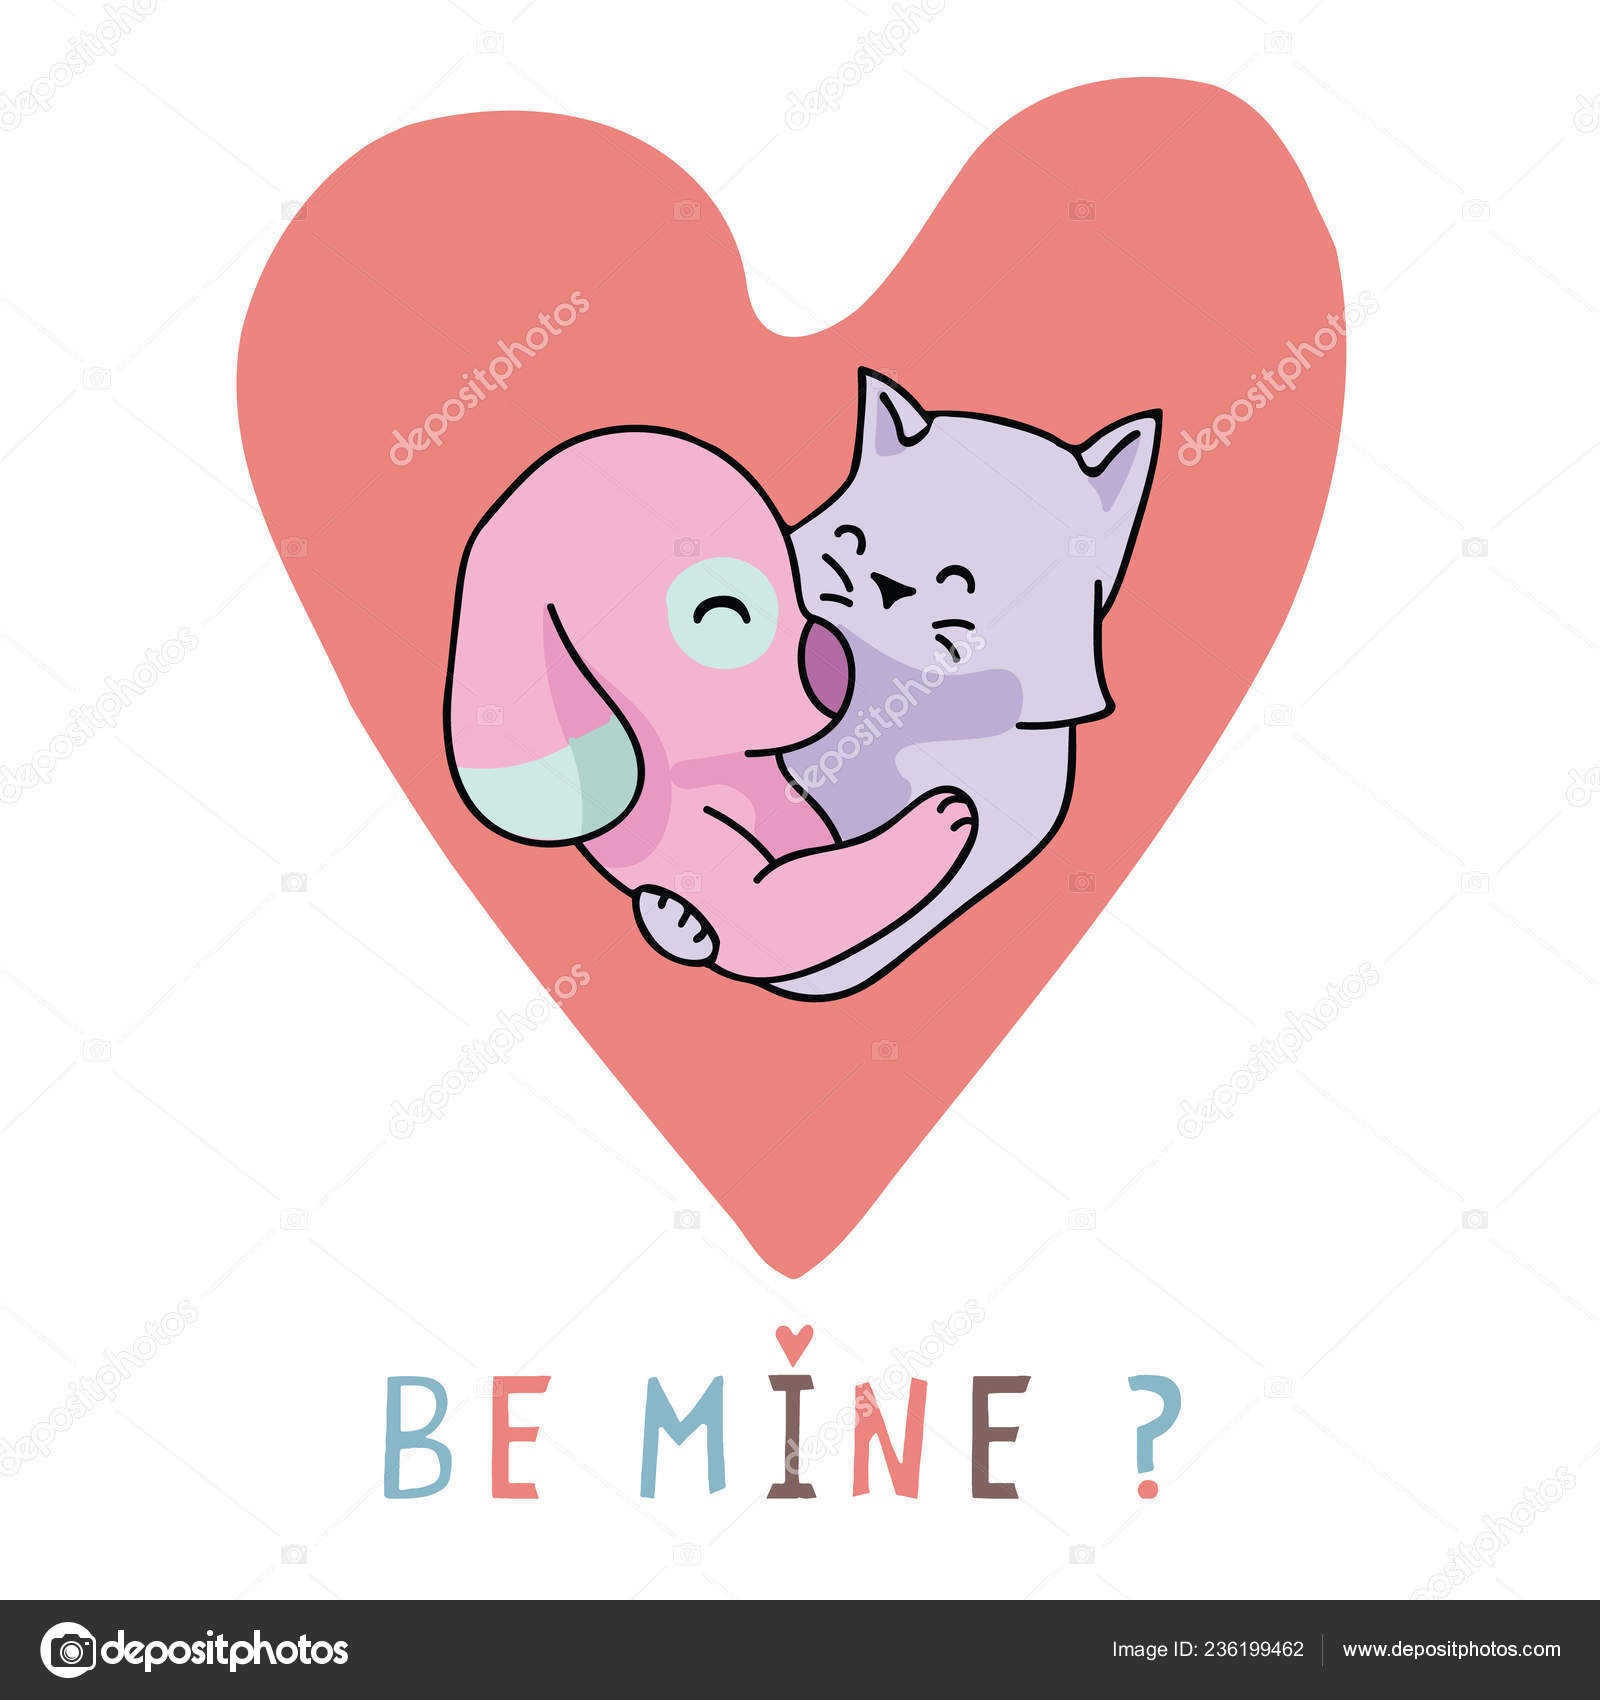 Two cats in love hug doodle icon. Cute pets - Stock